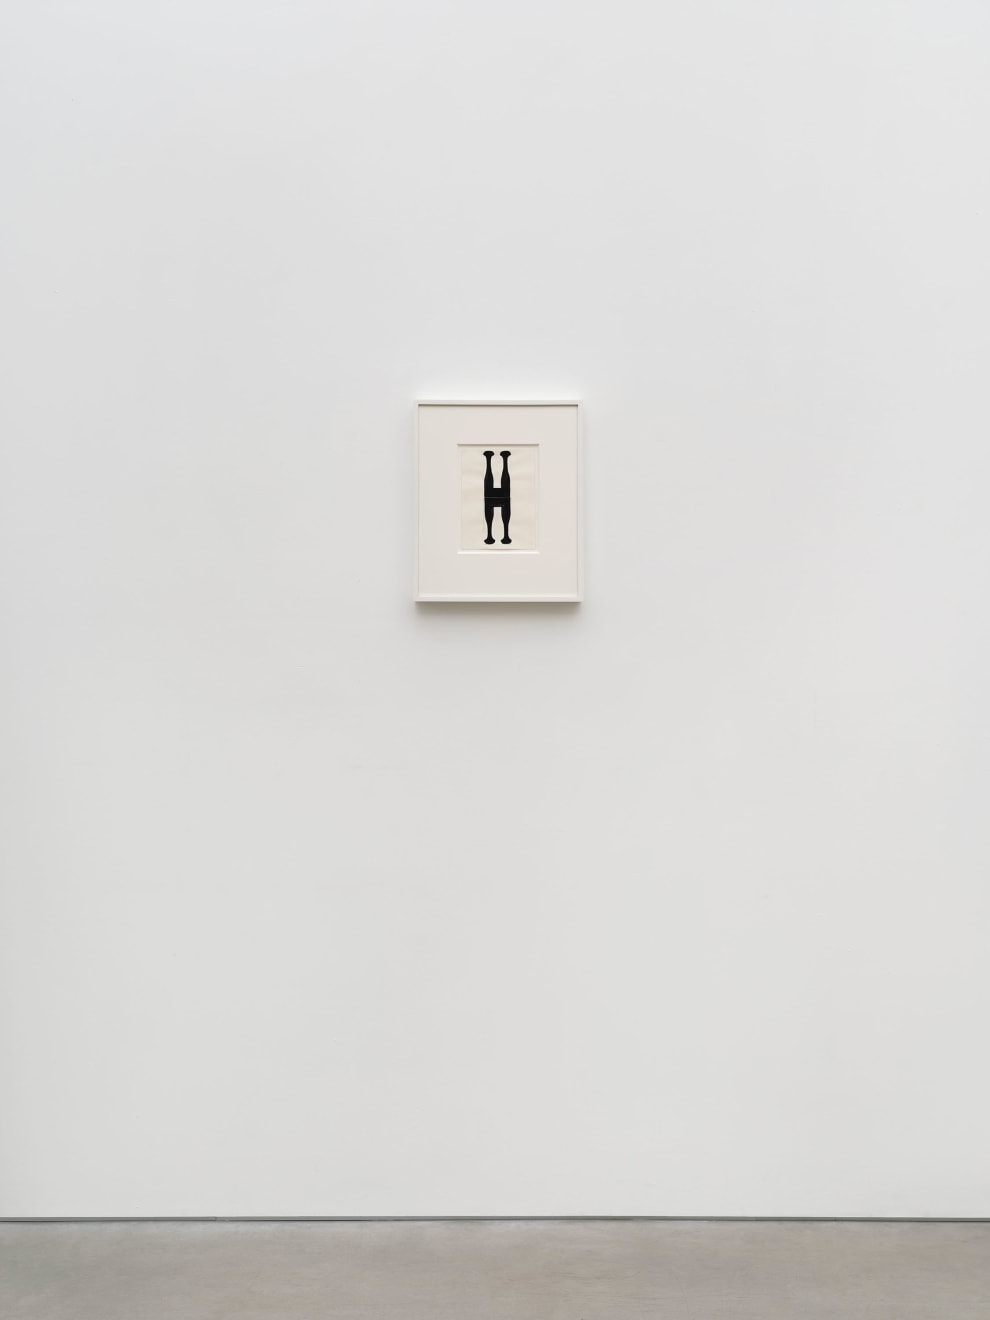 Ricky Swallow, Shaker Peg Form (&lsquo;H&rsquo;), 2015